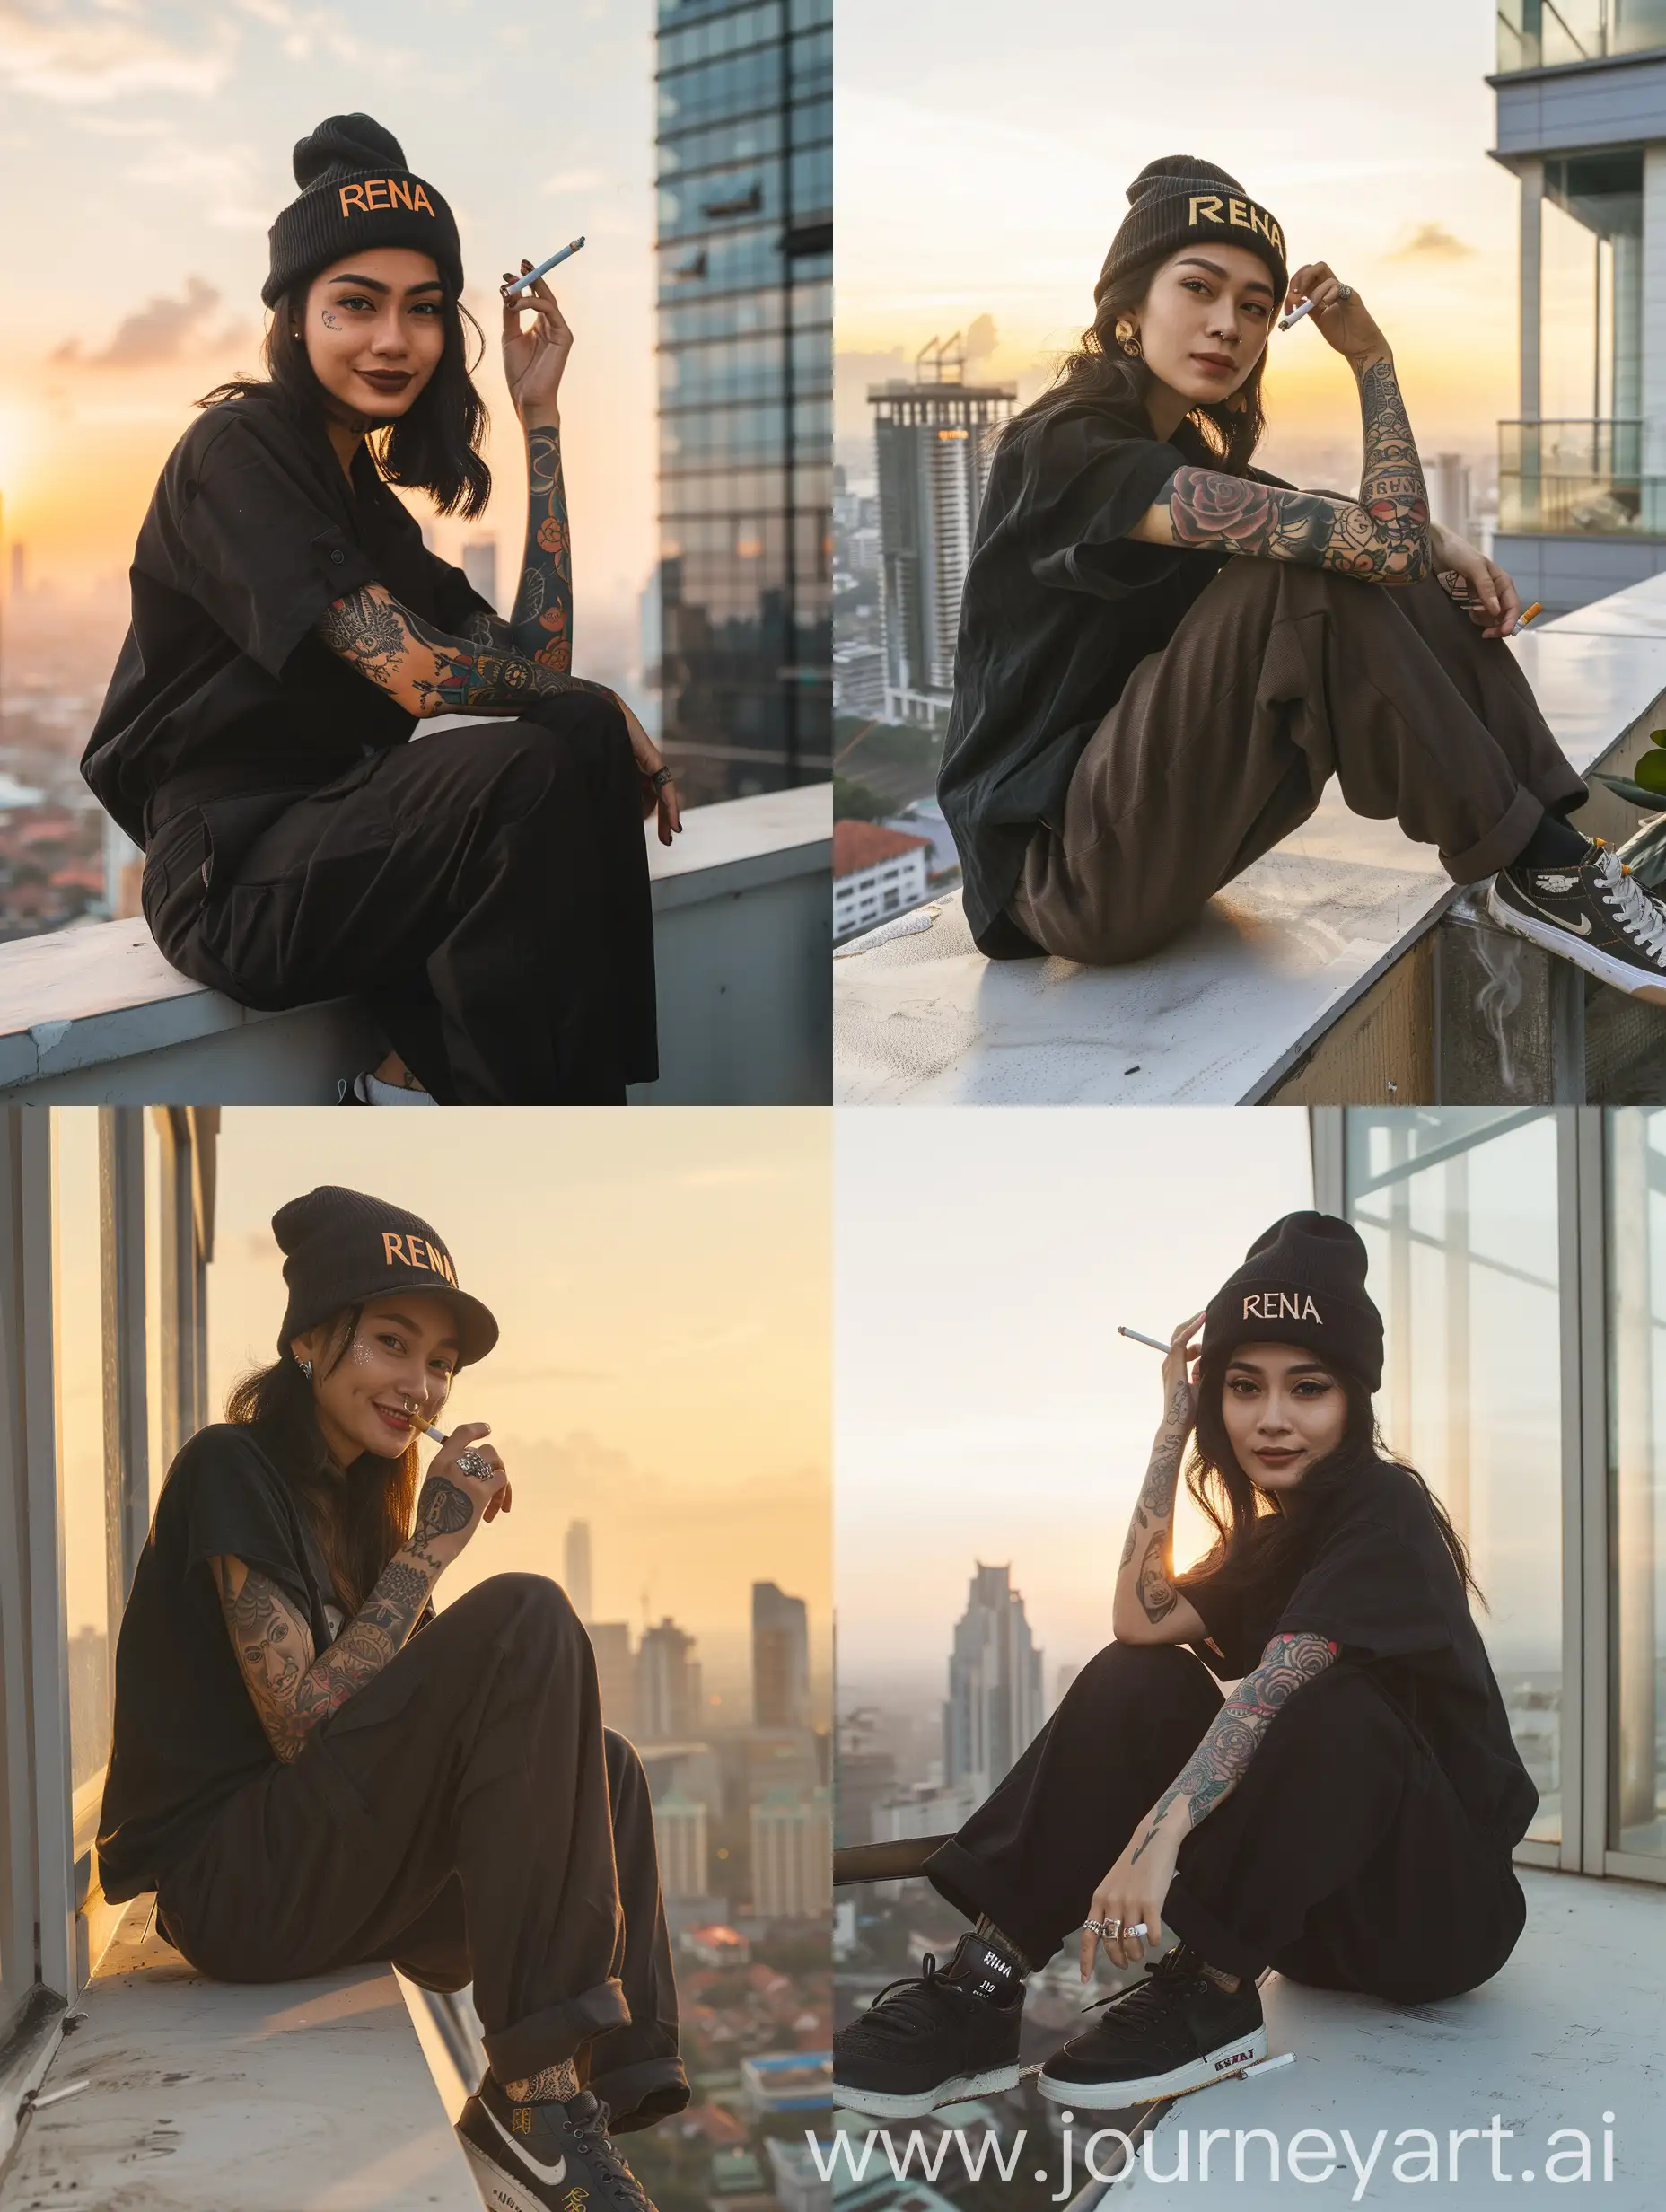 Portrait taken from the side, professional photography, full color, wide angle, 20 year old beautiful Indonesian woman, wearing a black shirt, trousers..., sneakers, full of tattoos on her arms, sitting on the roof of a tall building, holding a cigarette, wearing beanie hat with RENA written on it, view of the metropolitan city in front of him, clear sky, sunset in the morning, sharp look at the camera, smiling at the camera